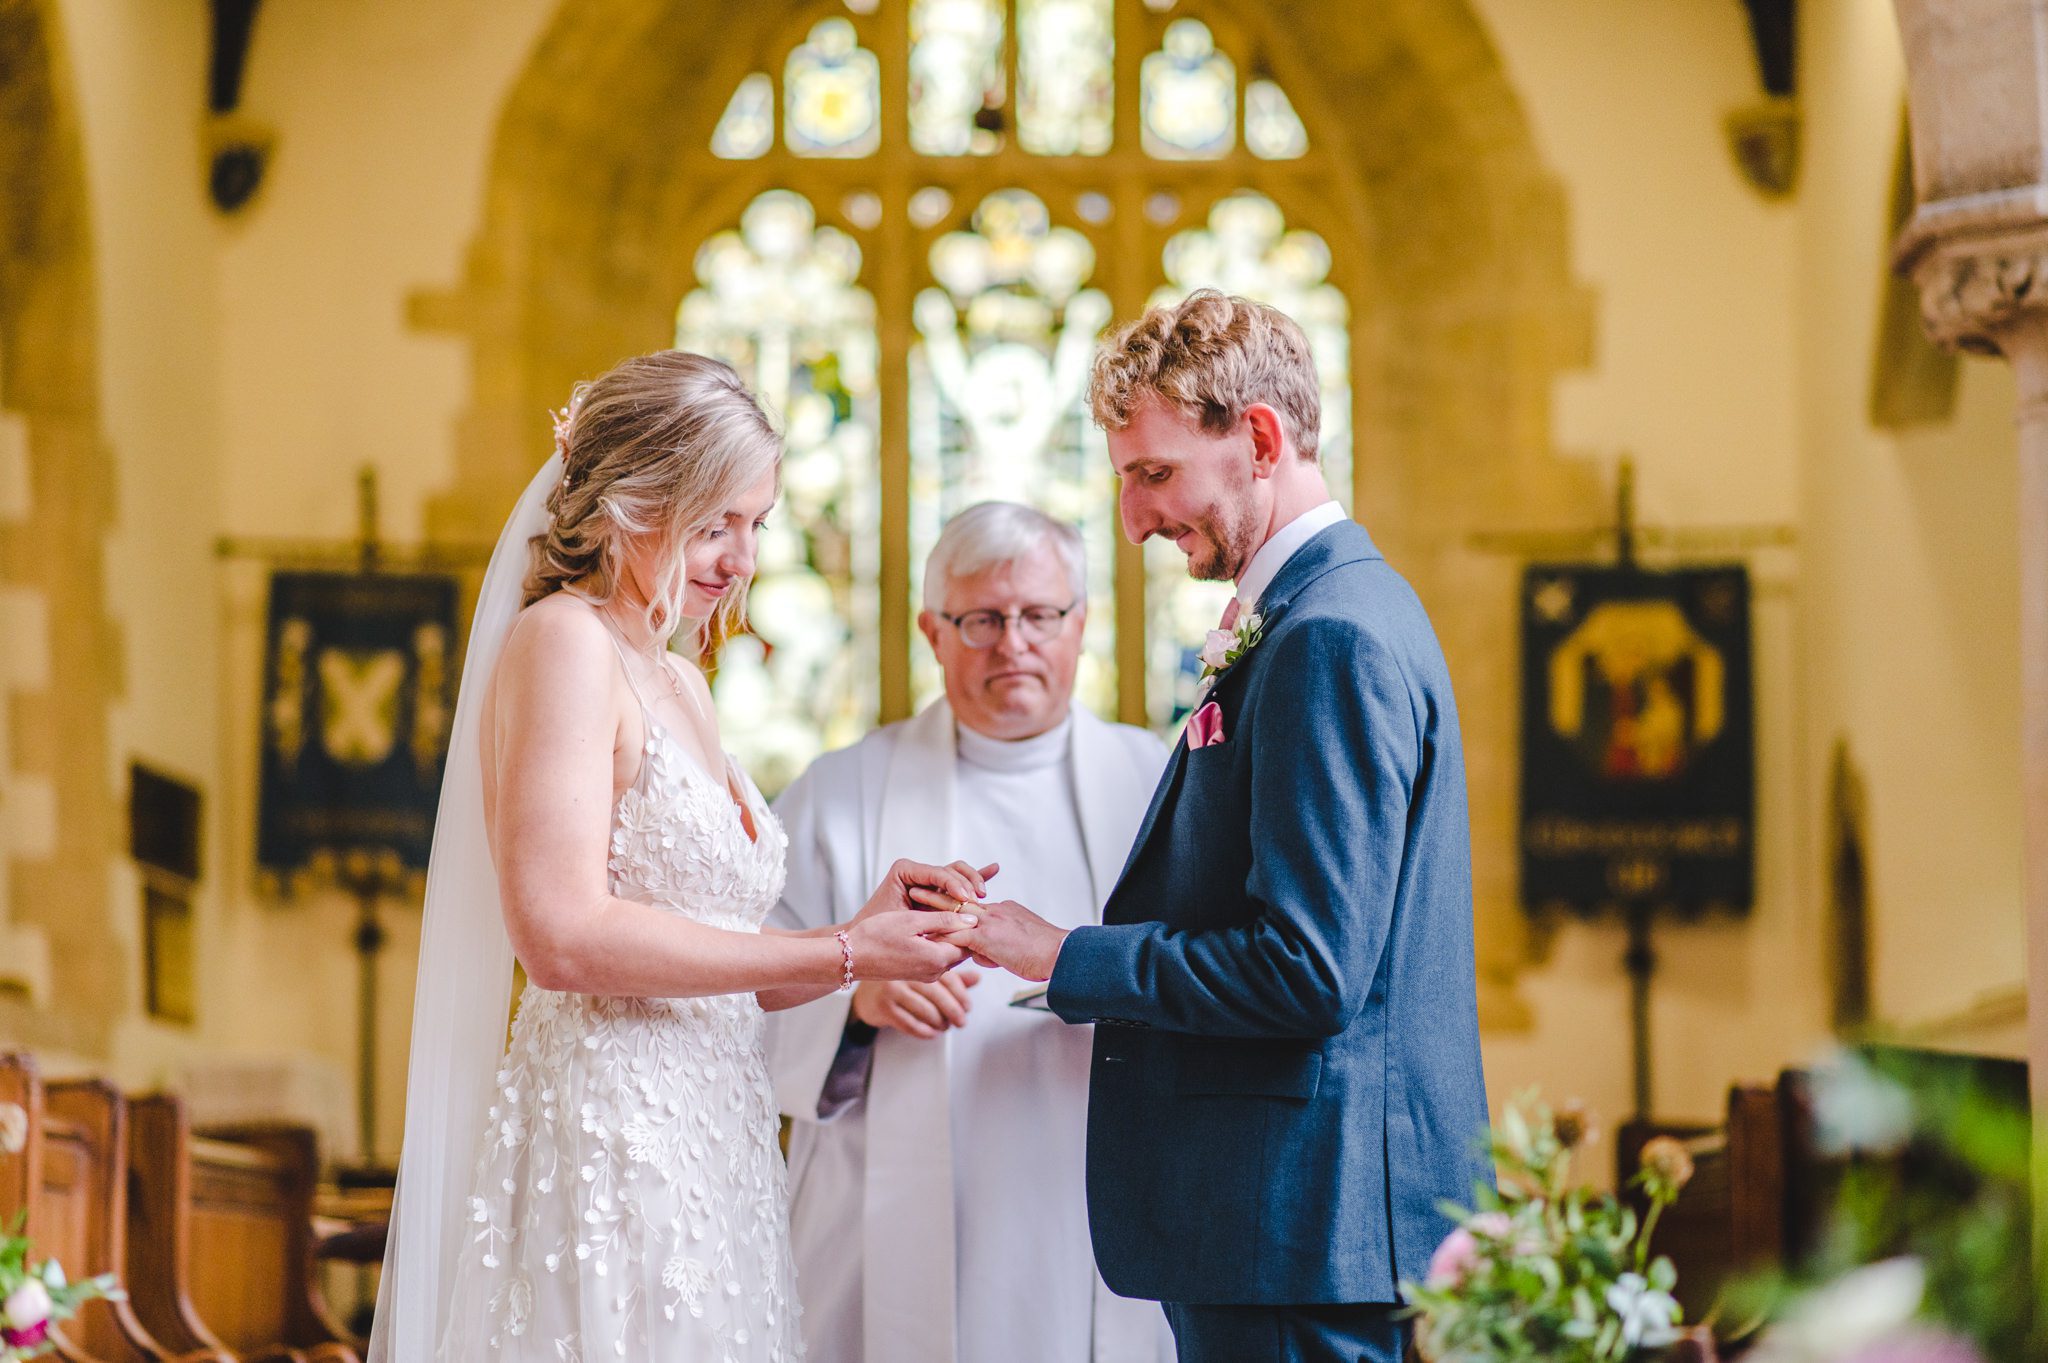 A couple getting married at Chedworth Church